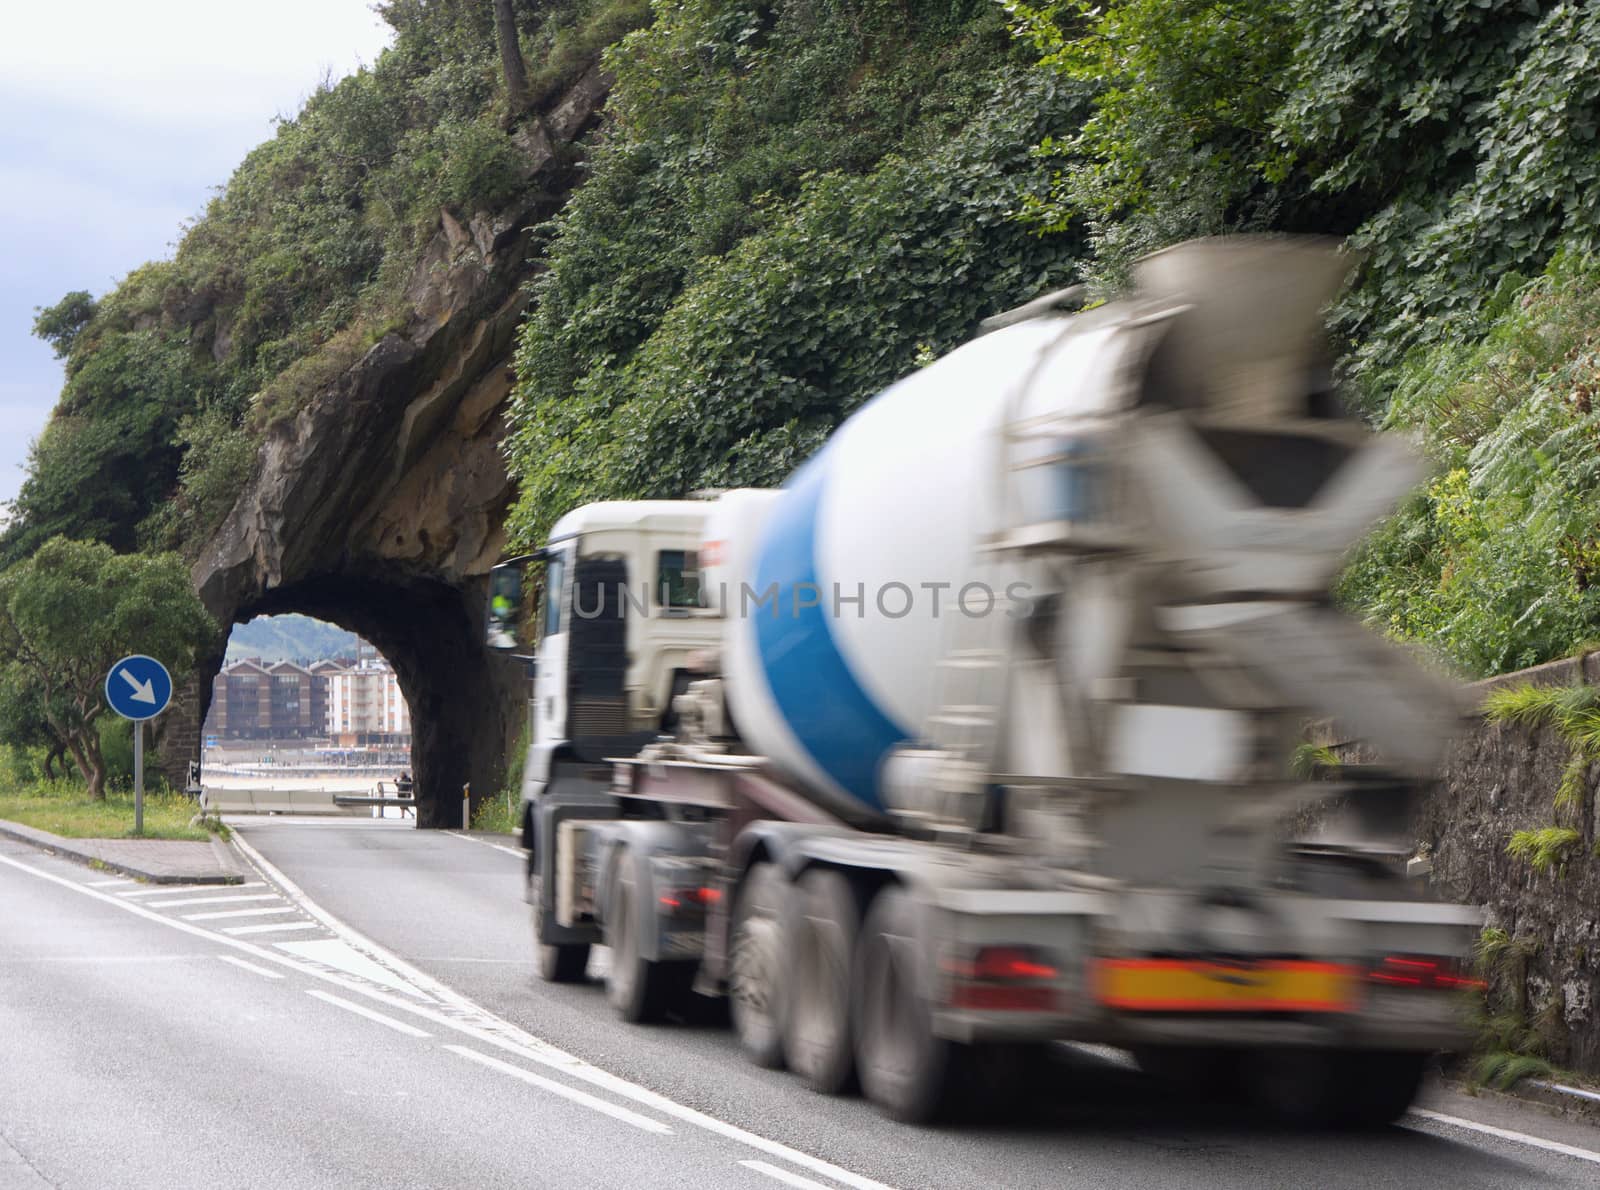 Mixer truck about to go through small tunnel in the rock on a road by the beach